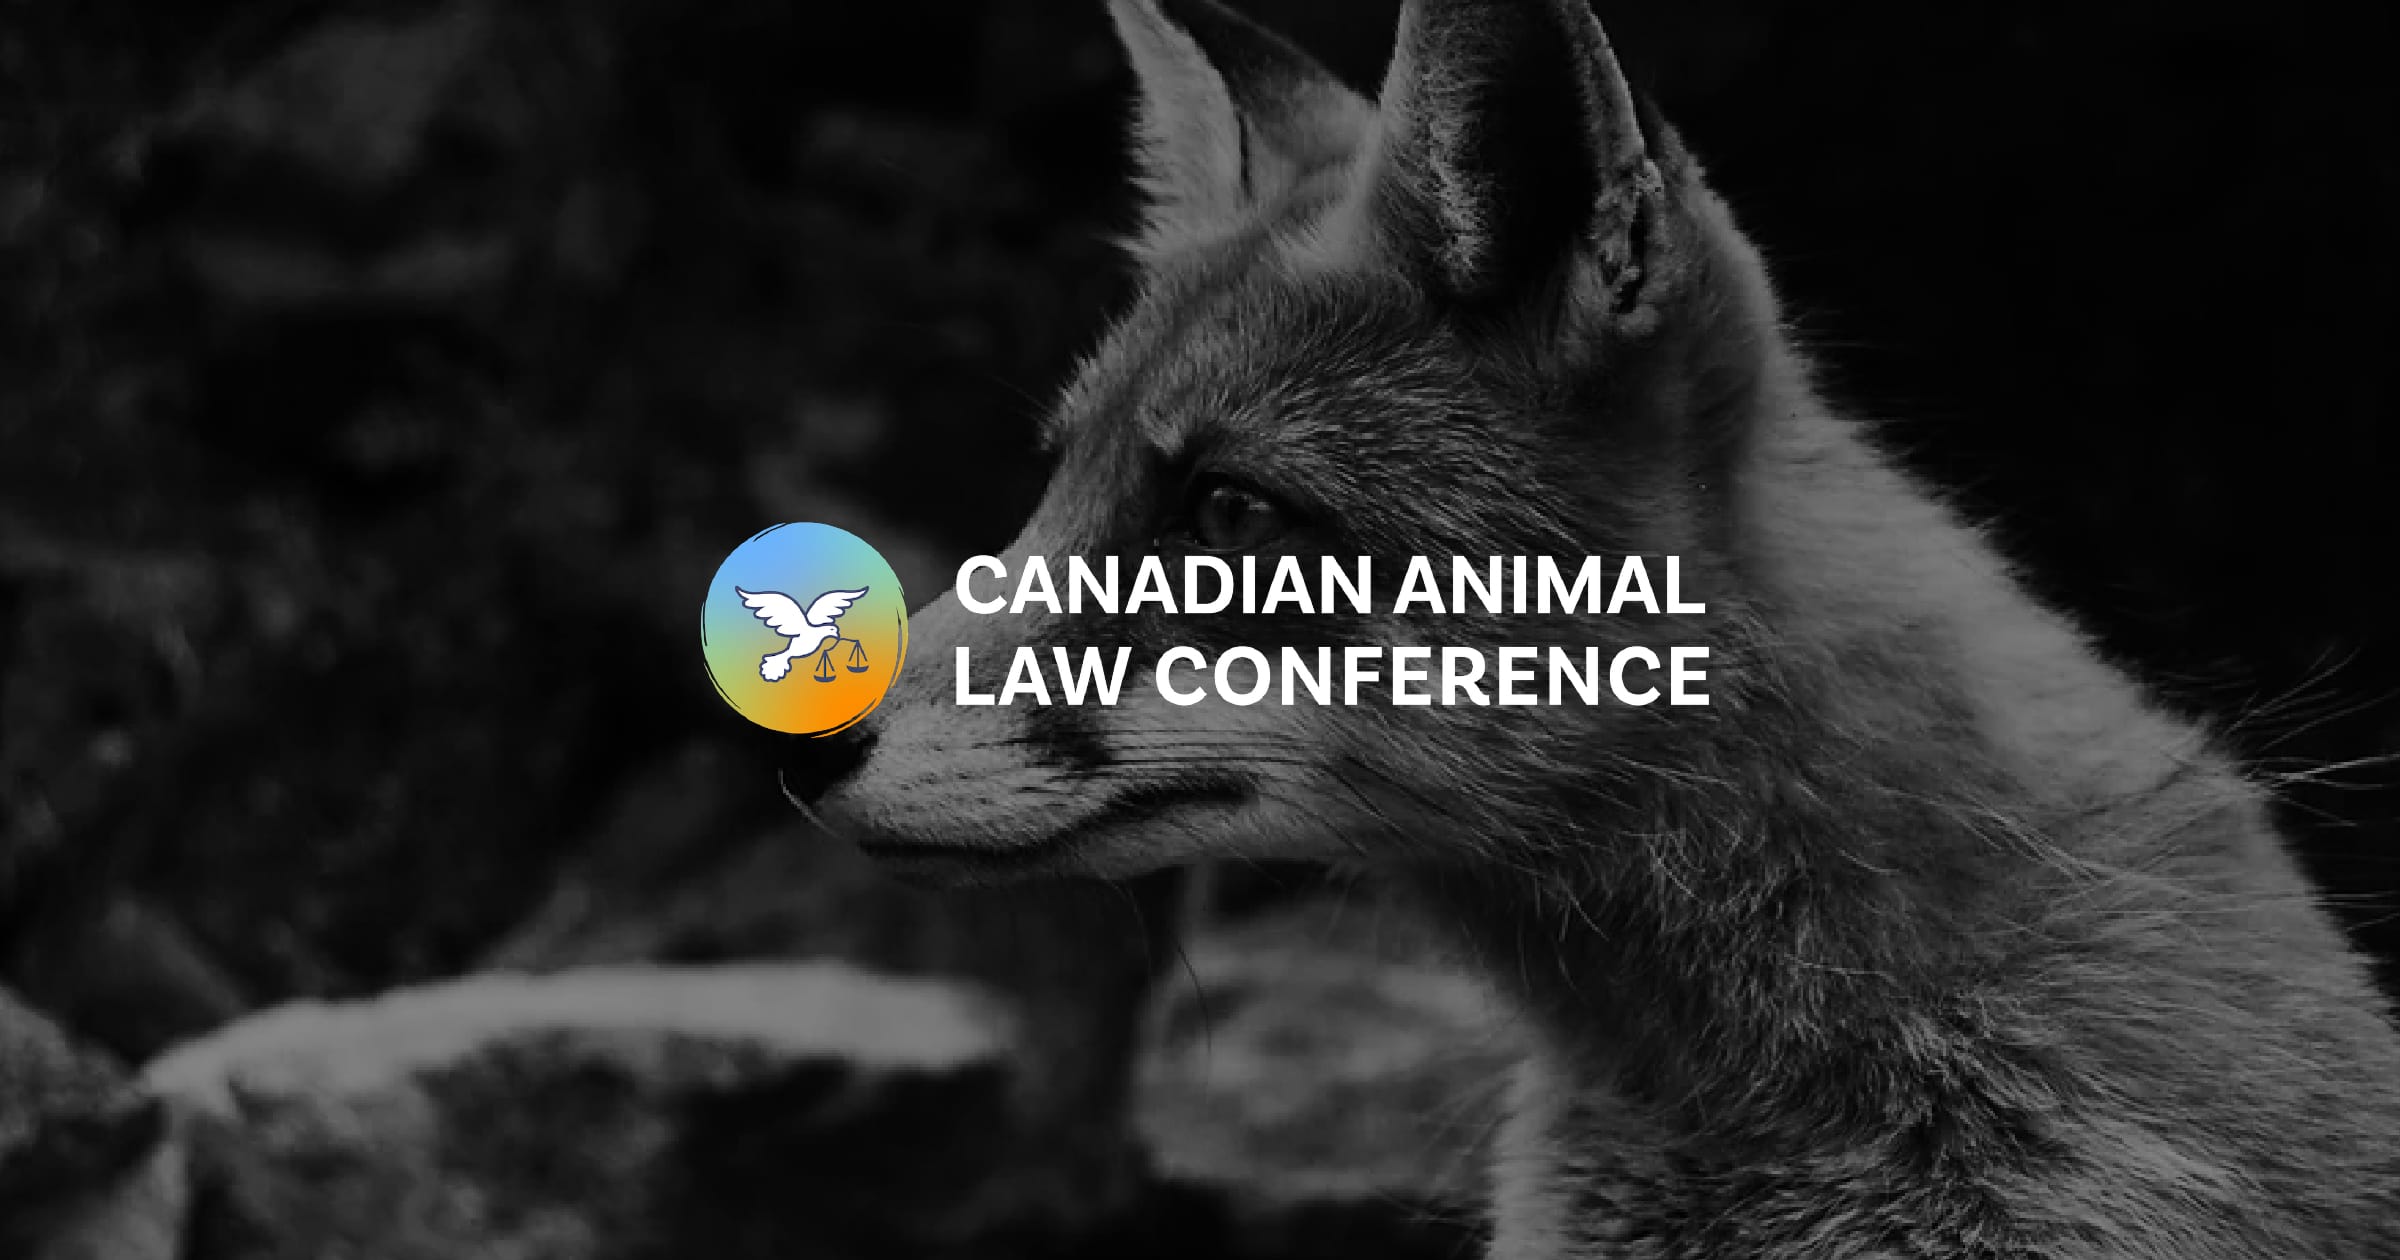 Image shows Canadian Animal Law Conference logo